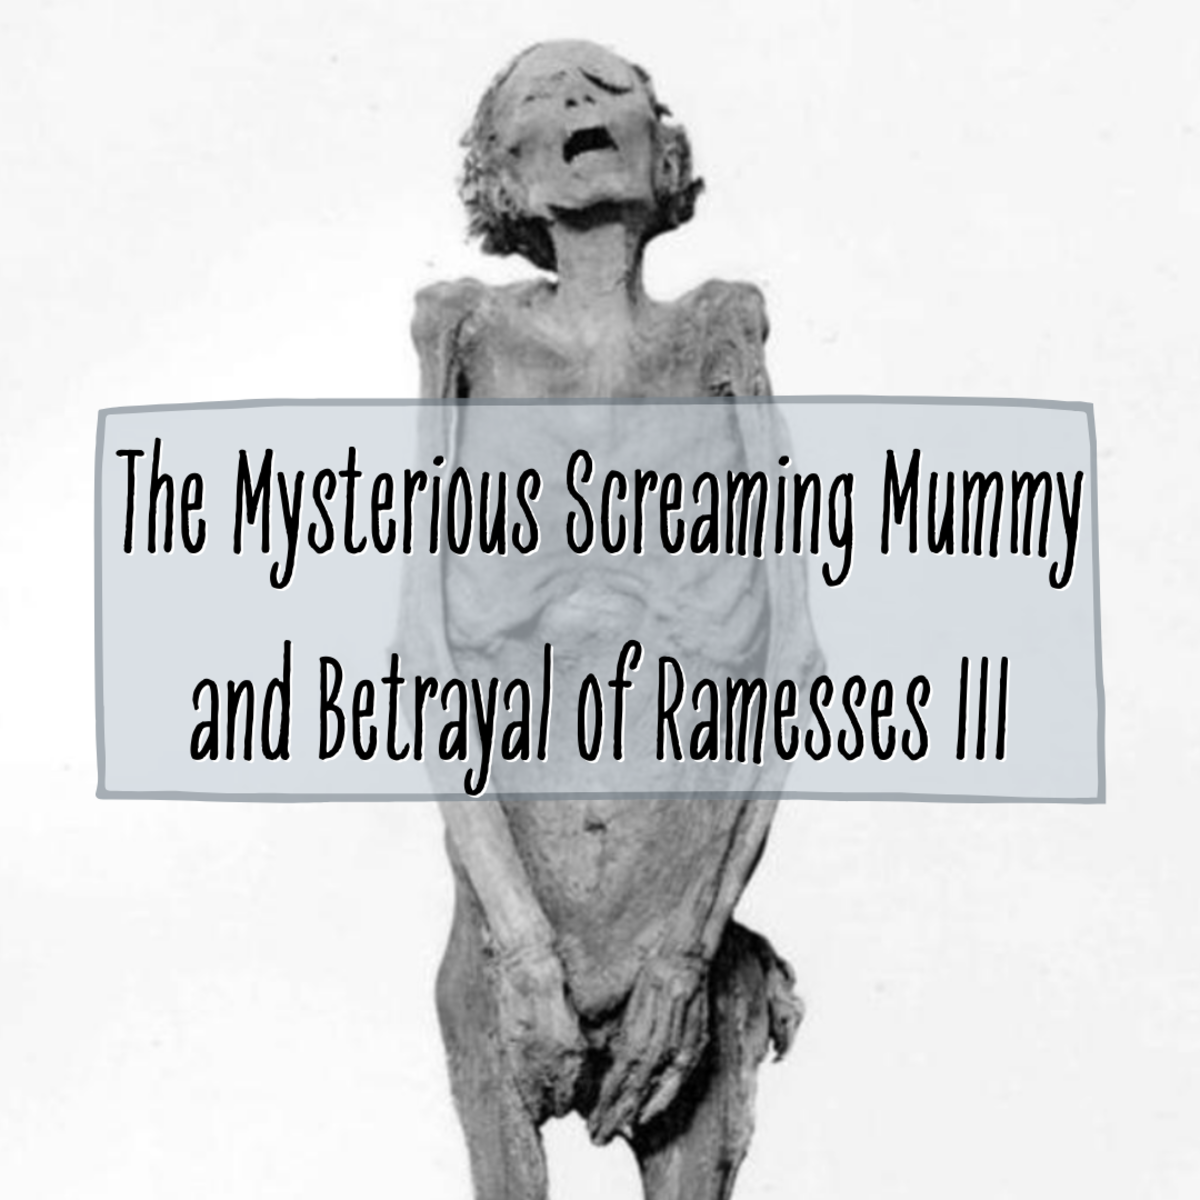 Read on to learn about the history of the mysterious Screaming Mummy and what modern science has discovered about him.